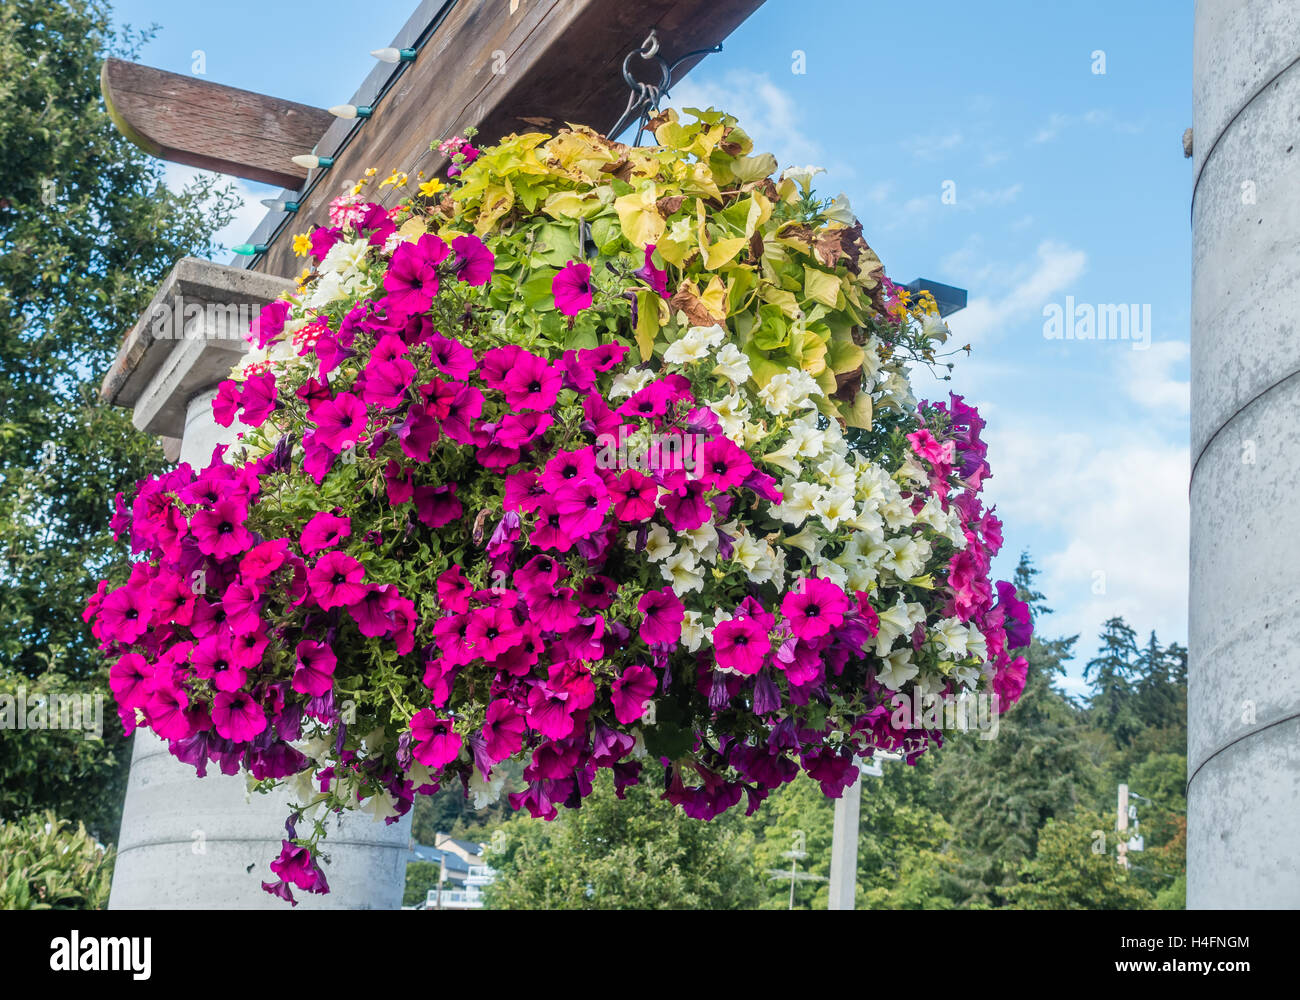 Pink and white petunias burst with vibrant color in a hanging basket. Stock Photo